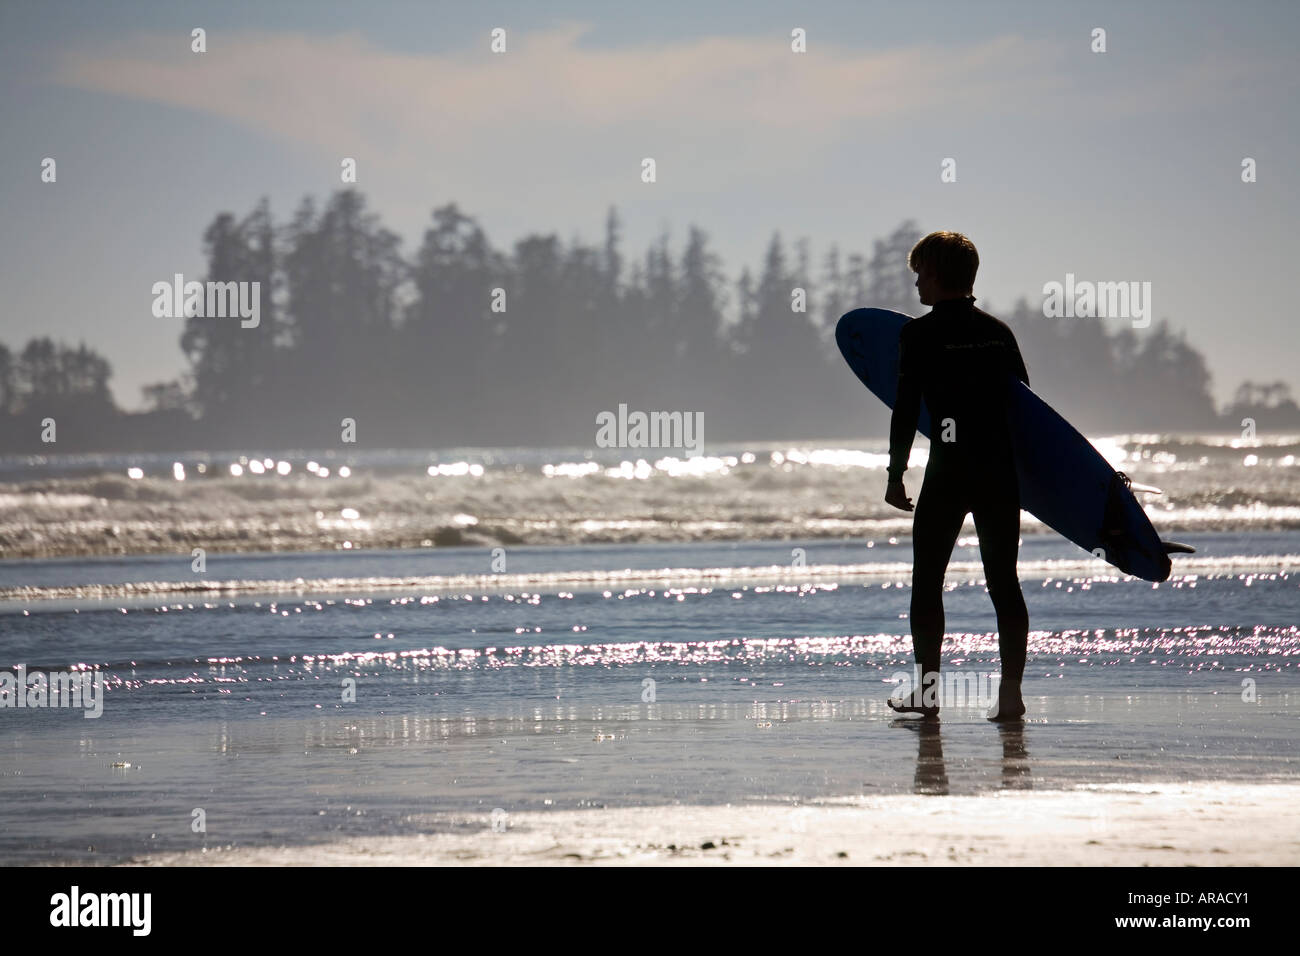 Surfer with board on Long Beach Pacific Rim national park reserve Vancouver island Canada Stock Photo